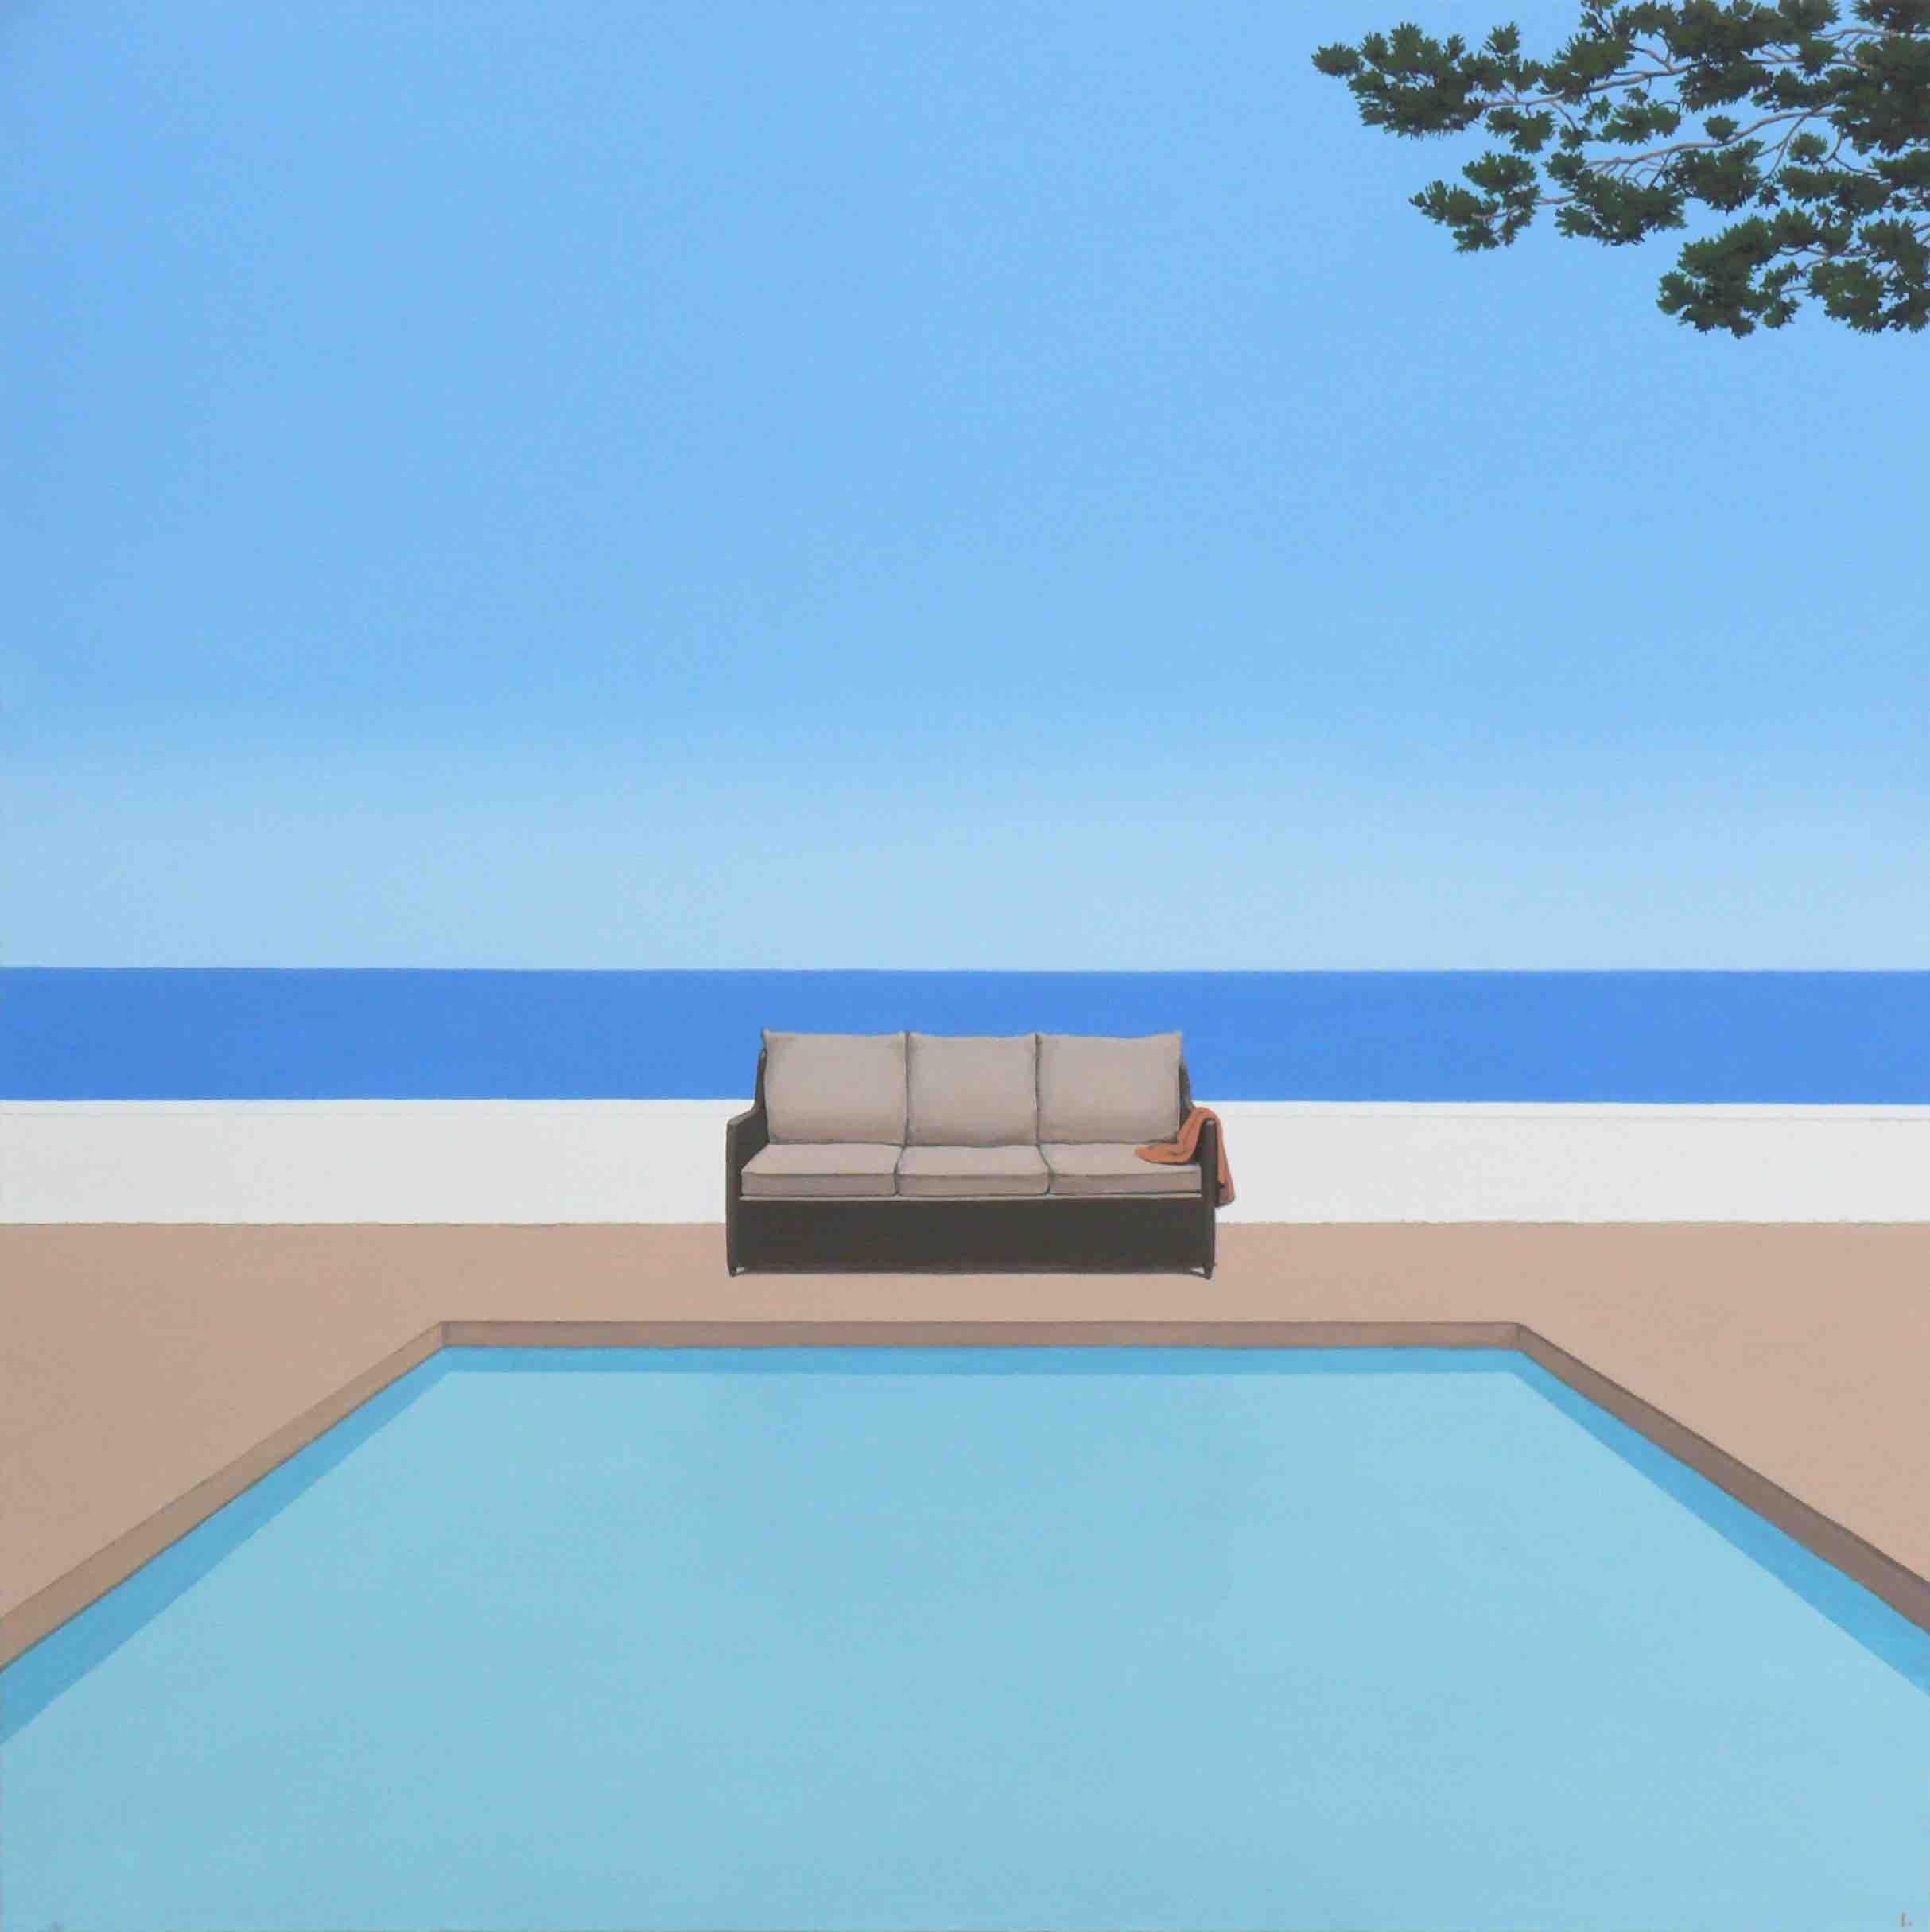 Magdalena Laskowska Figurative Painting - Pool by the ocean - landscape painting